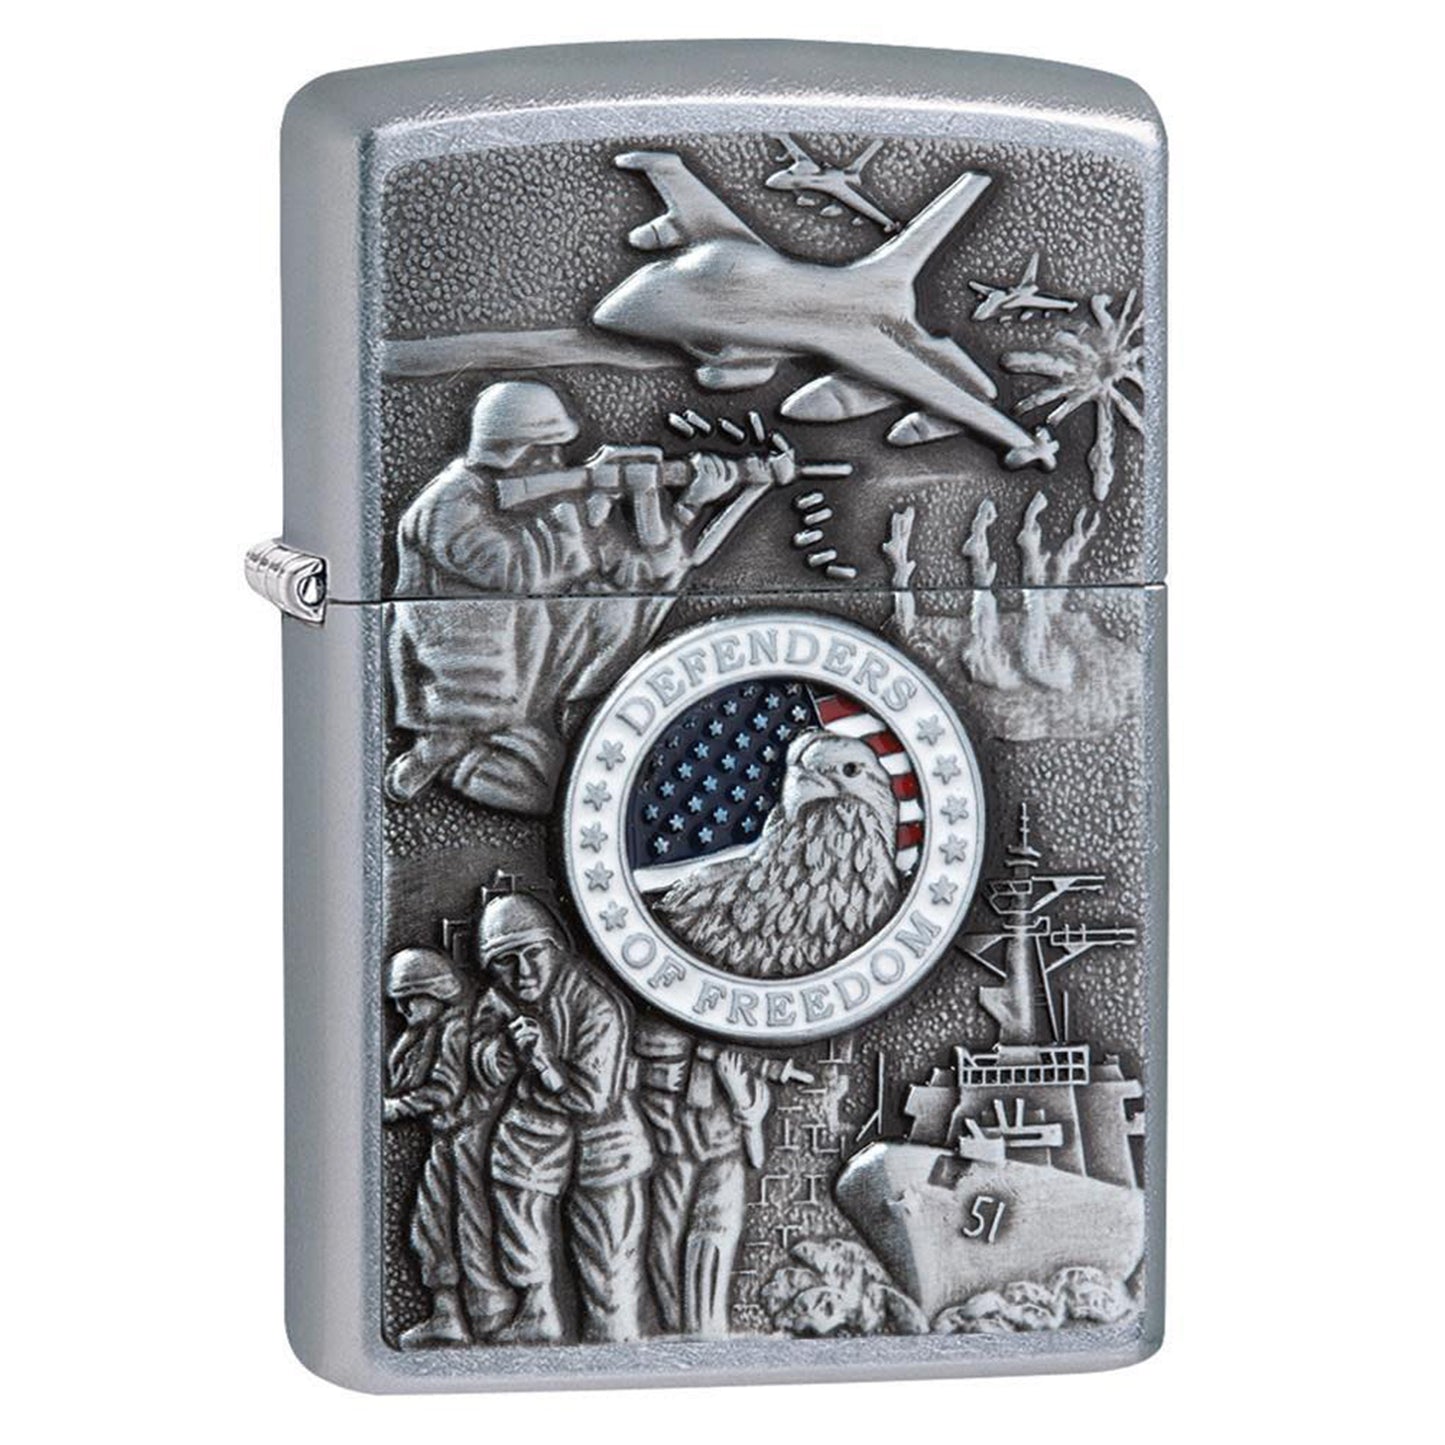 Zippo Joined Forces Lighter #41